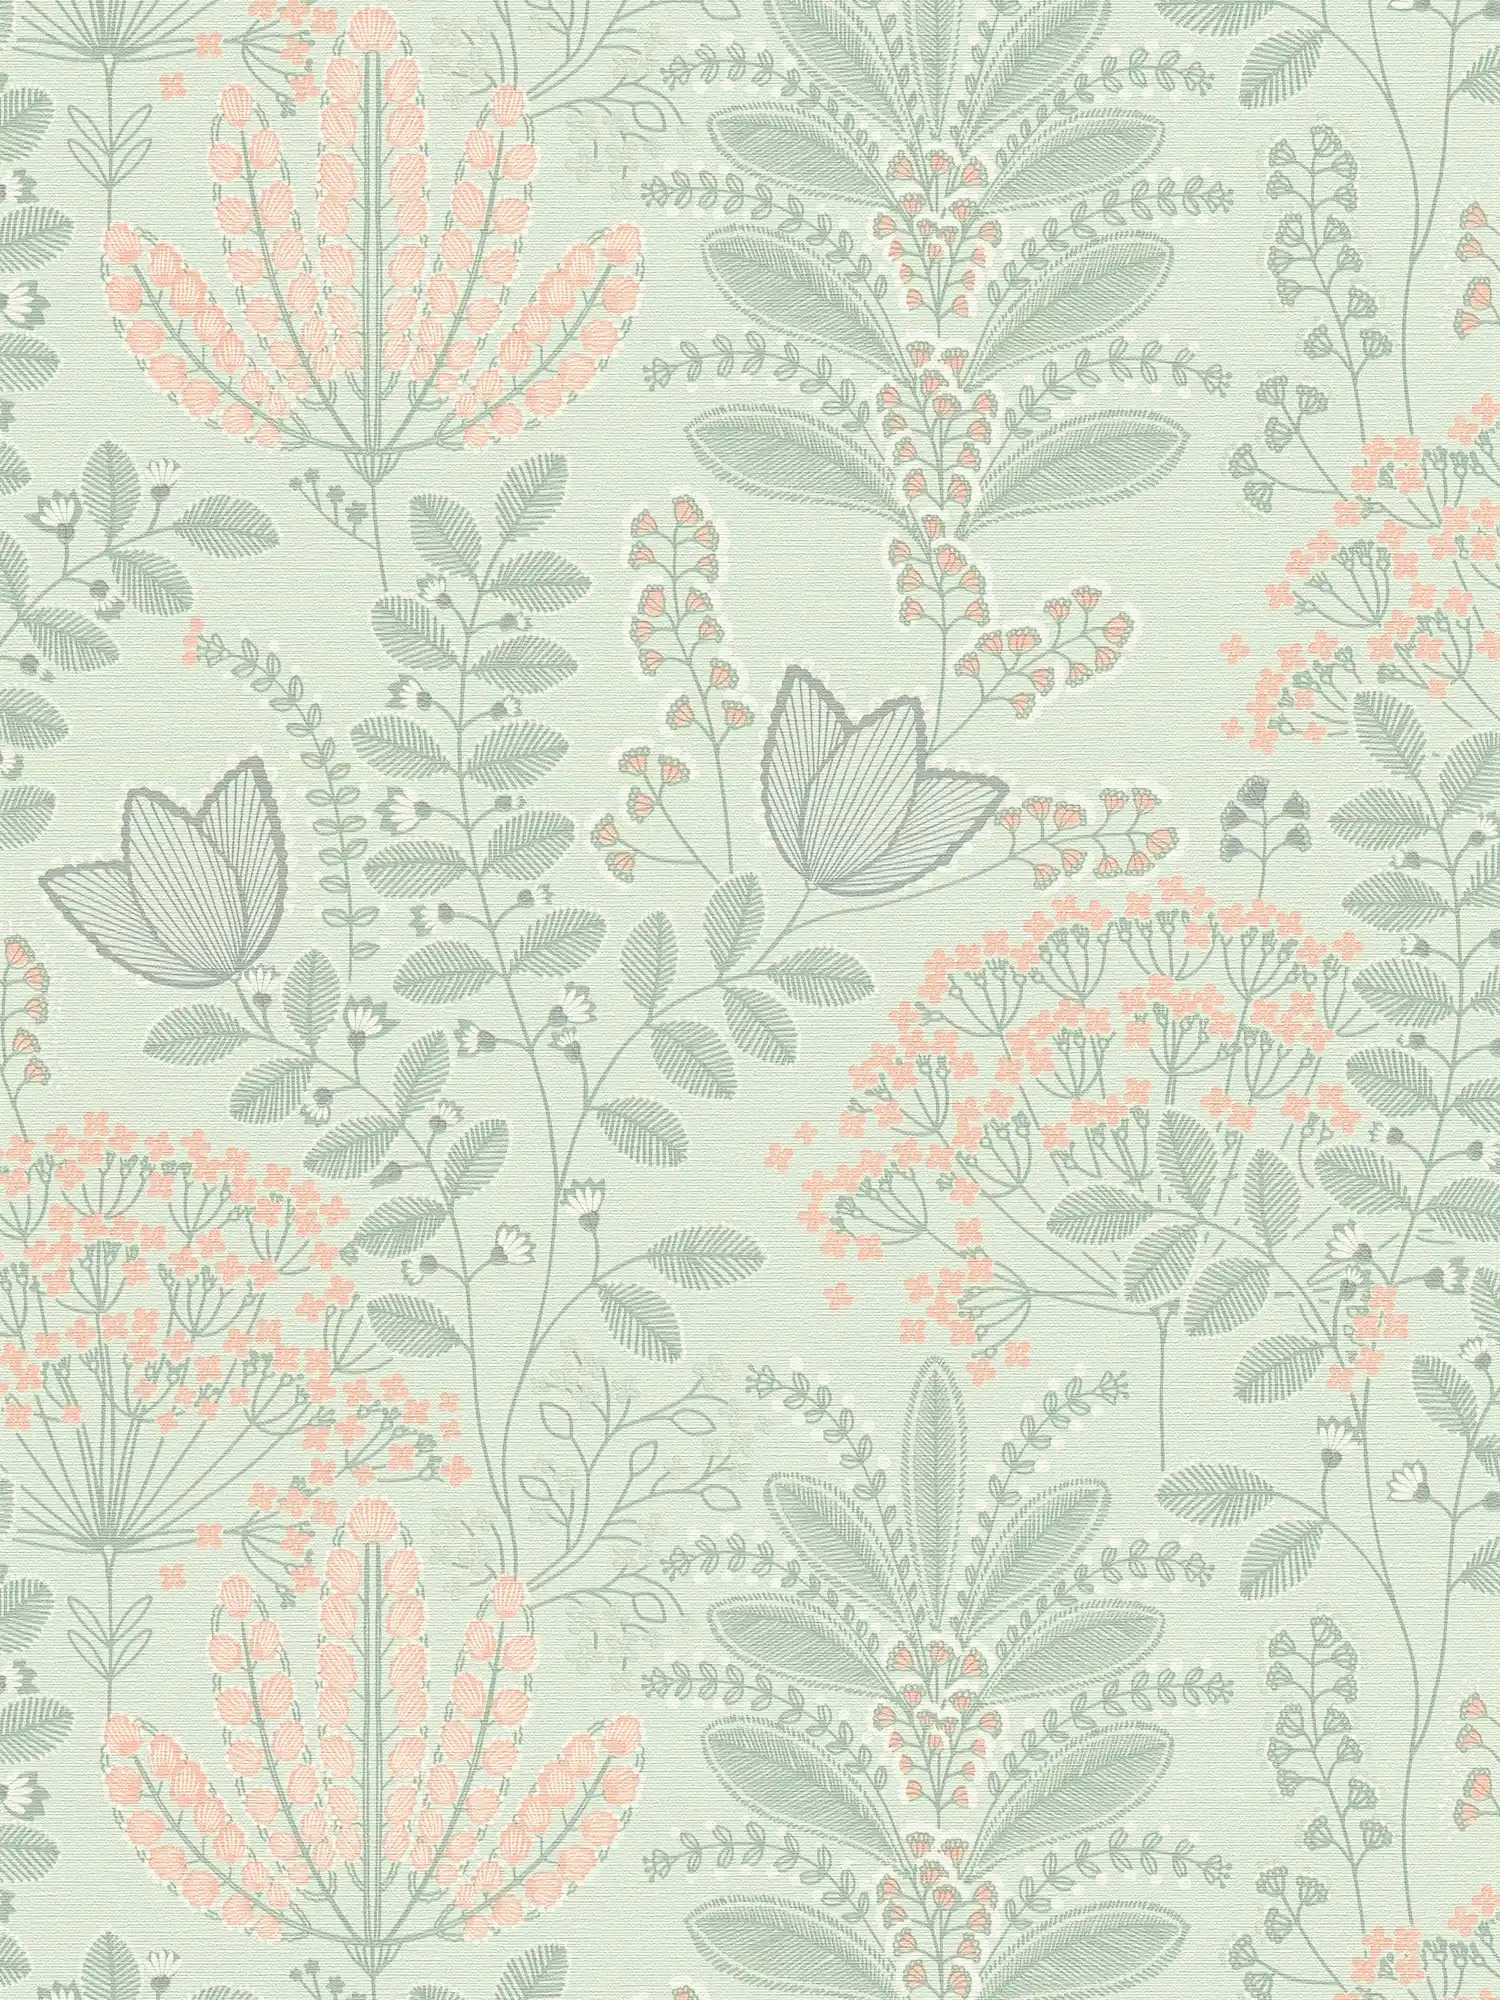 wallpaper floral with leaves in retro look light textured, matt - green, grey, pink
